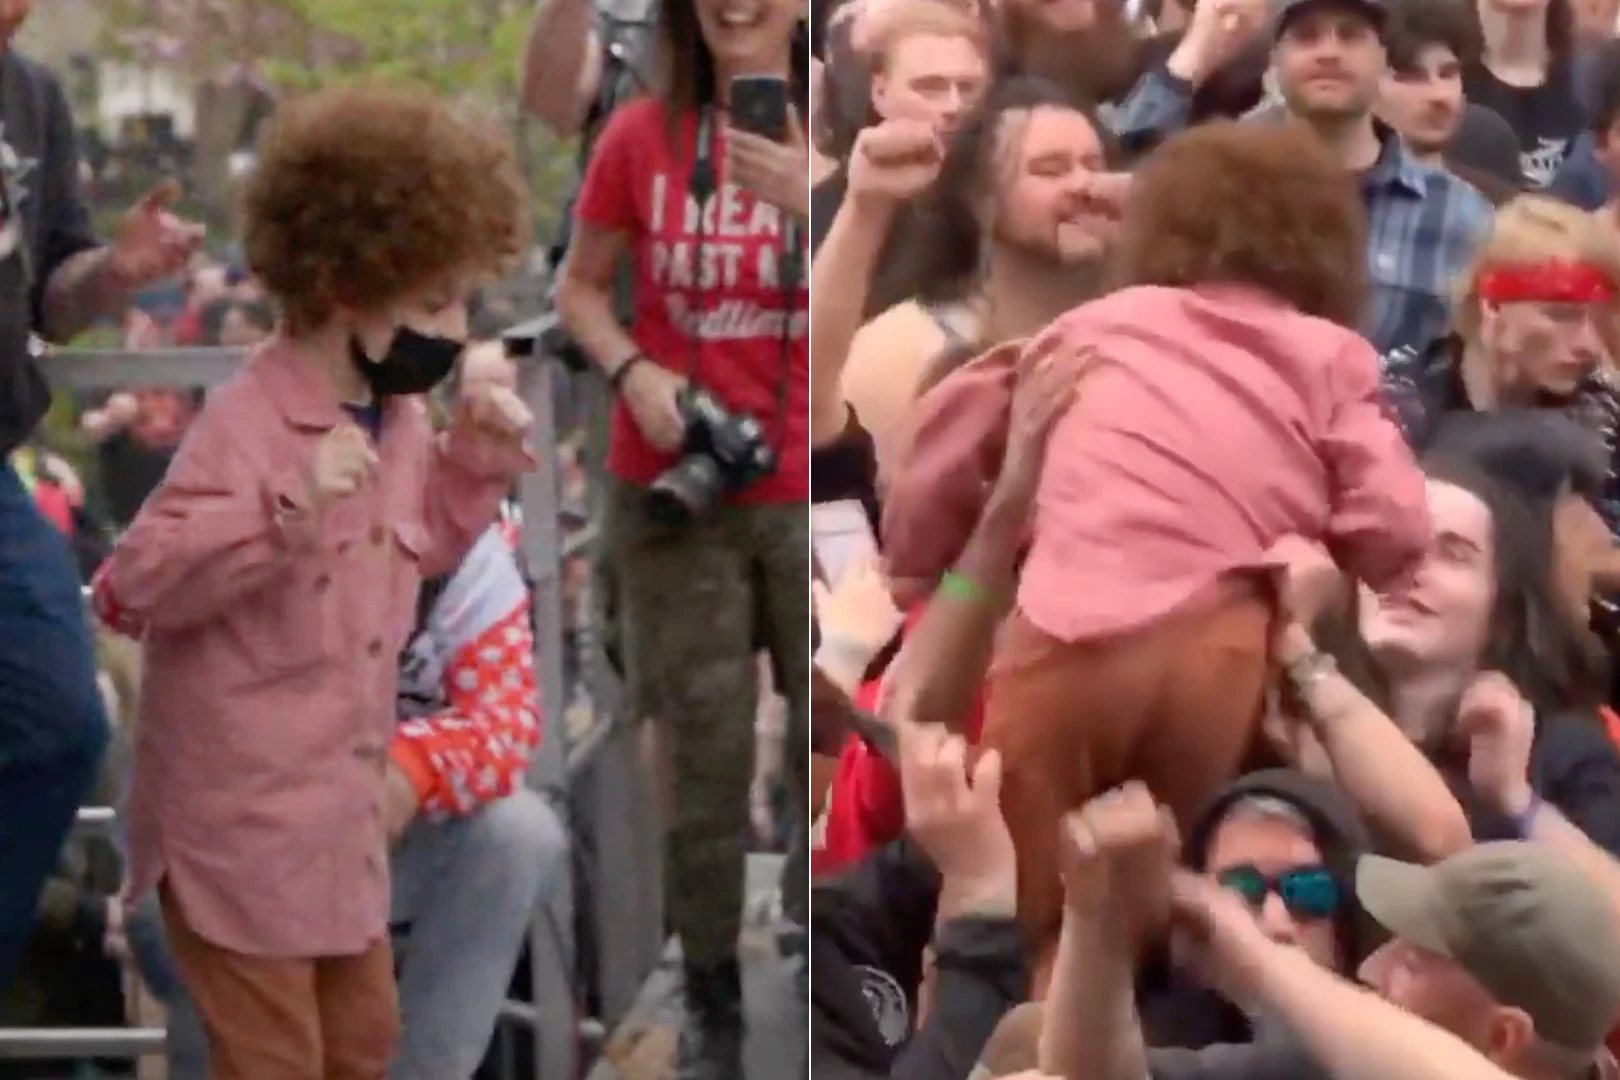 Little Girl Enjoys First Time Crowd Surfing at Hardcore Show image pic